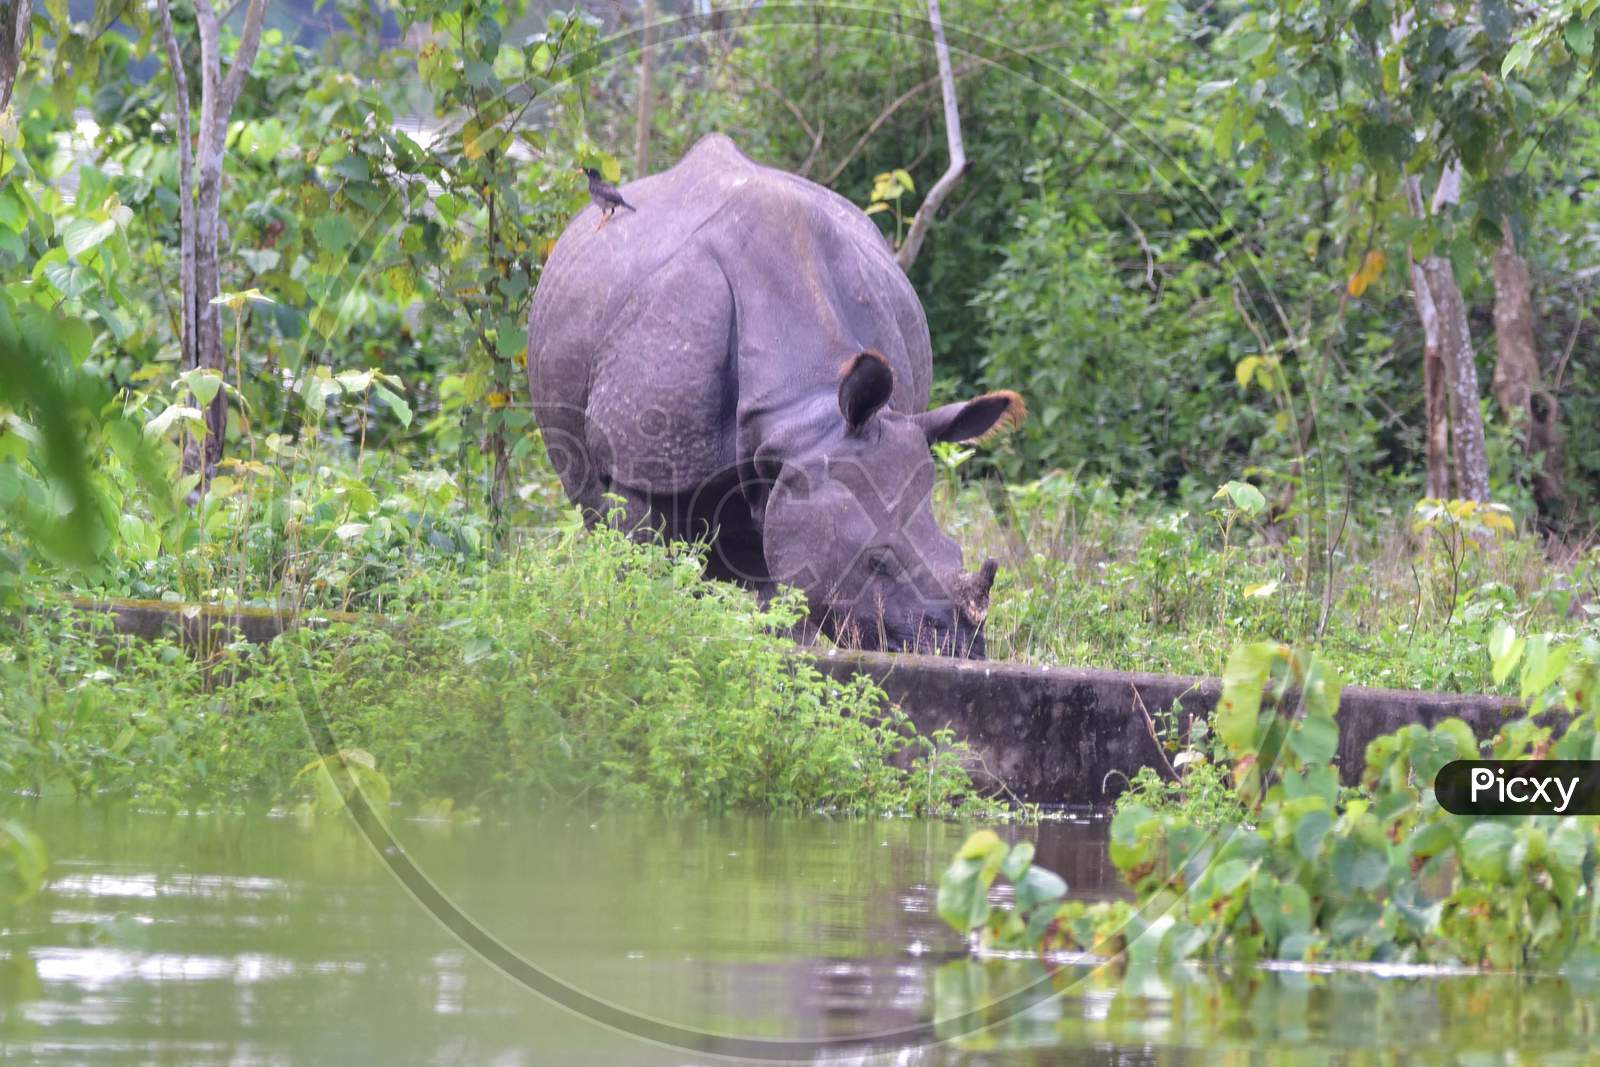 A rhino takes shelter at a higher ground as the Kaziranga National Park got flooded in Nagaon, Assam on July 13, 2020